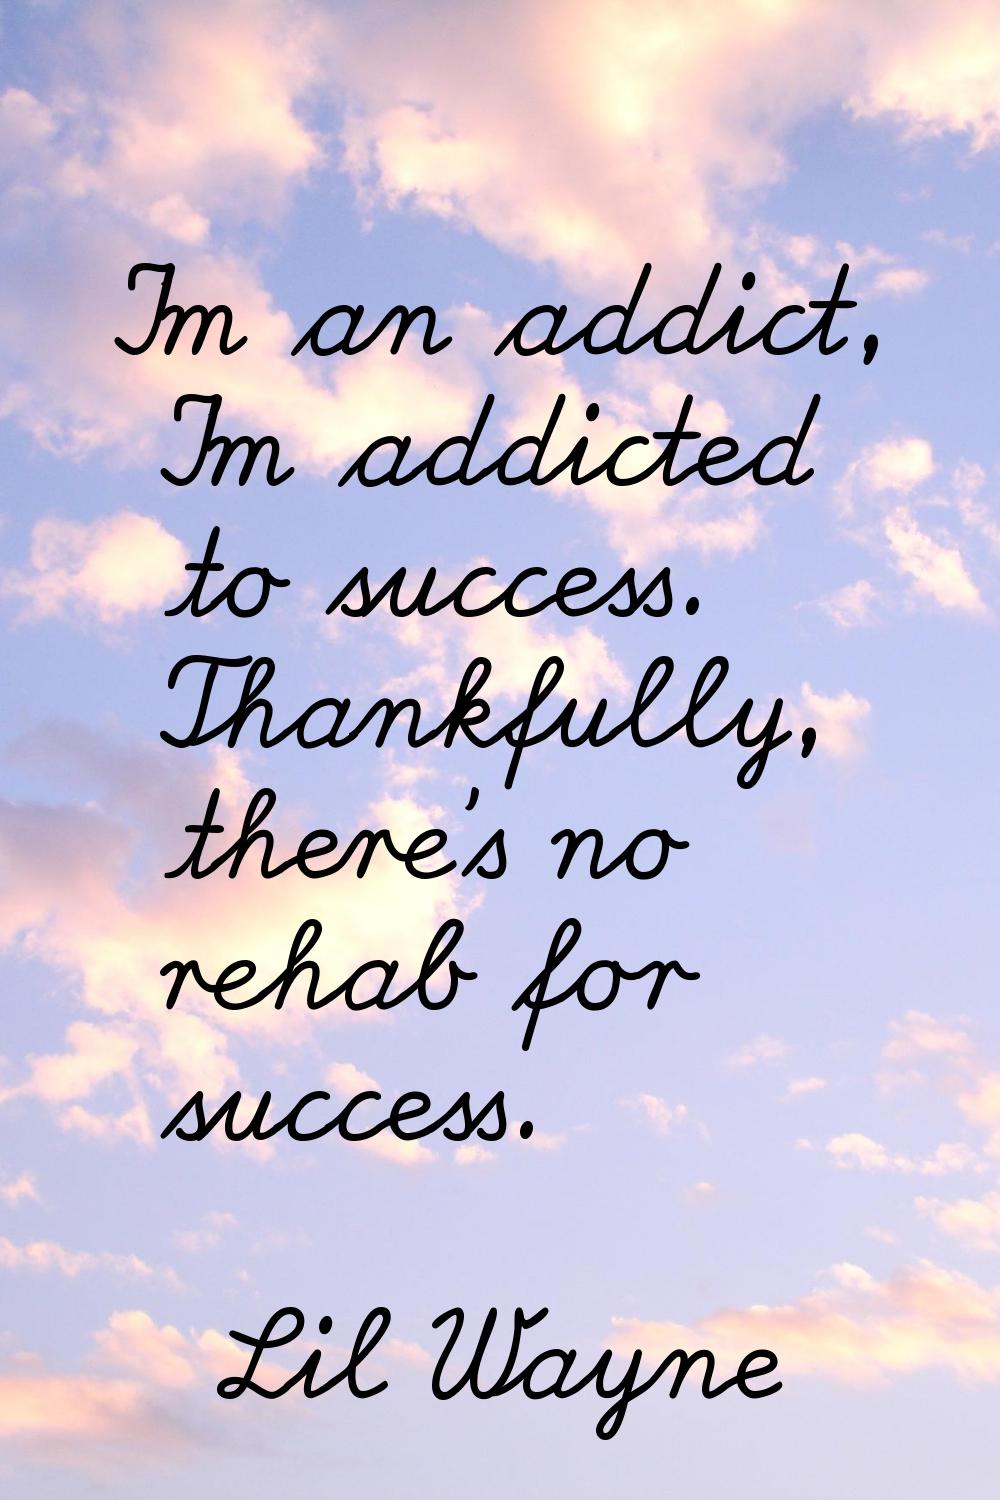 I'm an addict, I'm addicted to success. Thankfully, there's no rehab for success.